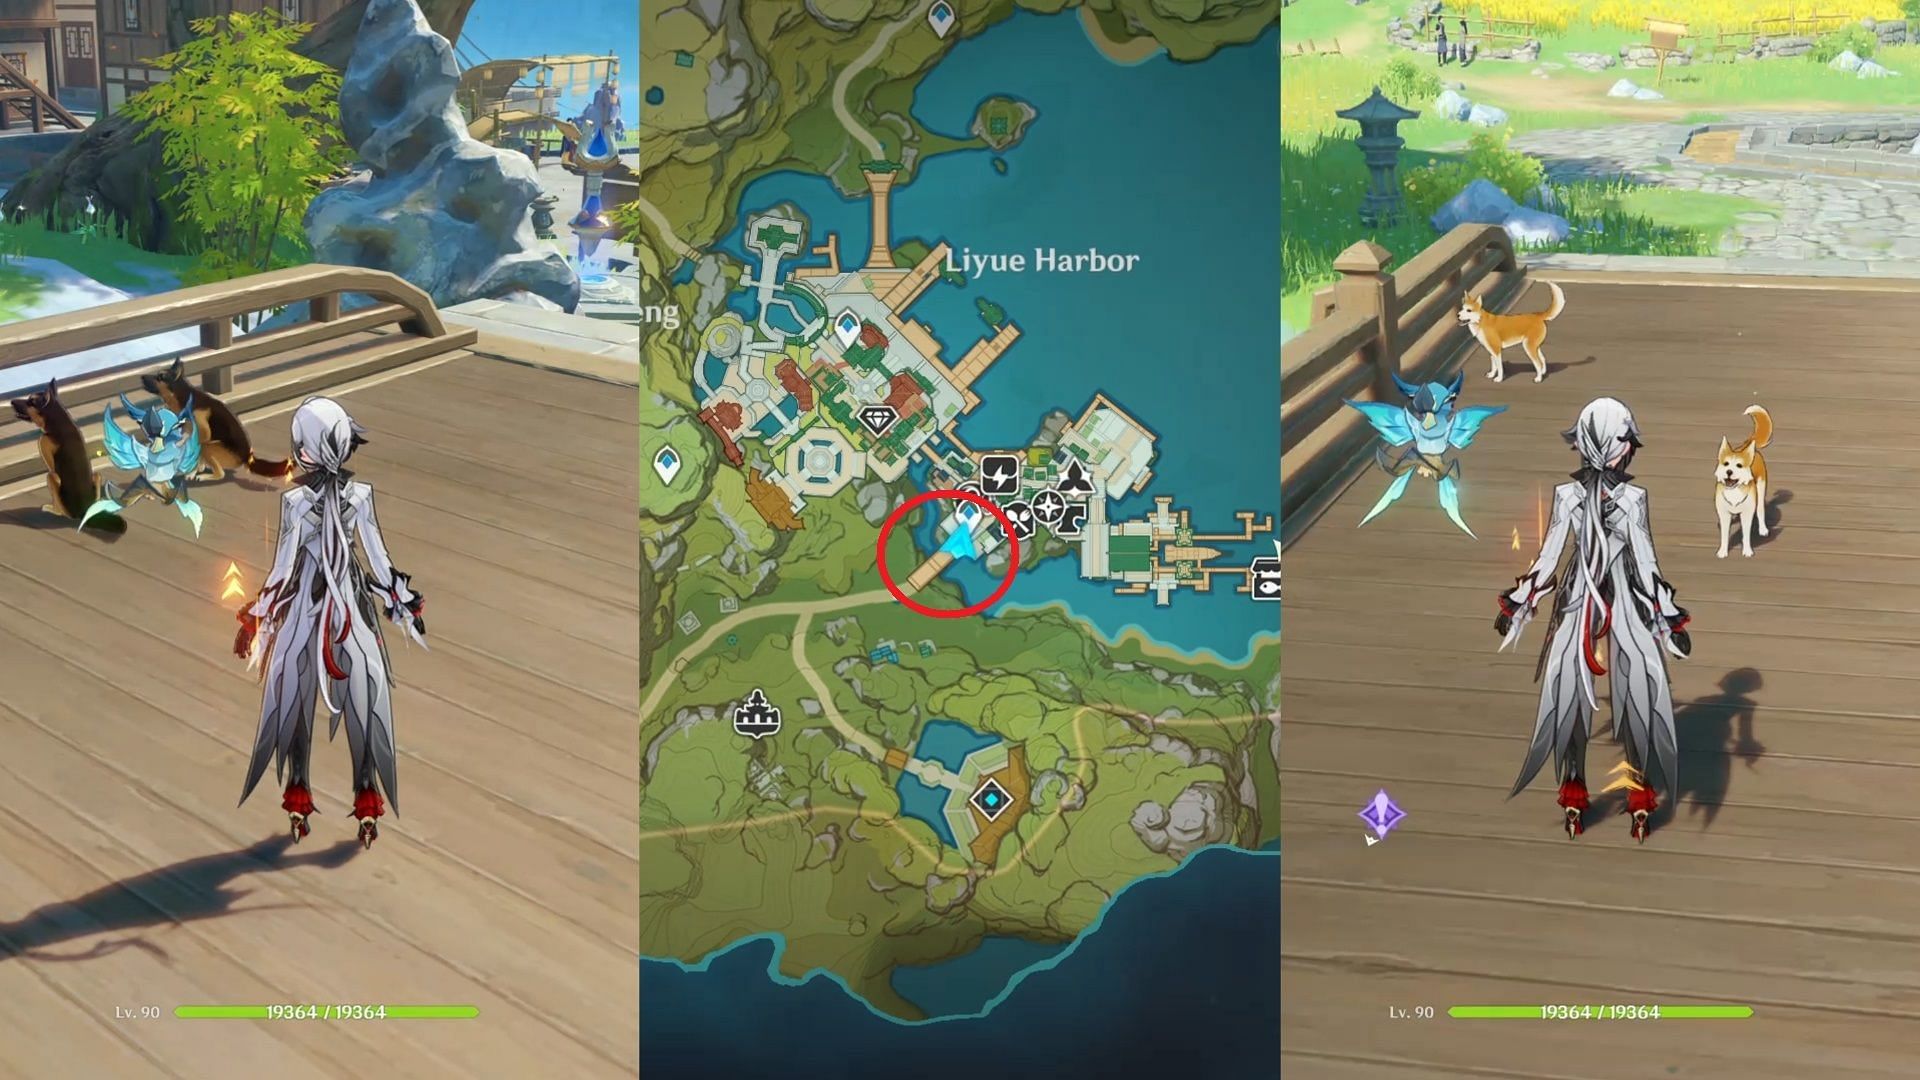 You can find Forest Patrol Hounds and Shiba dogs in Liyue Harbor (Image via HoYoverse)